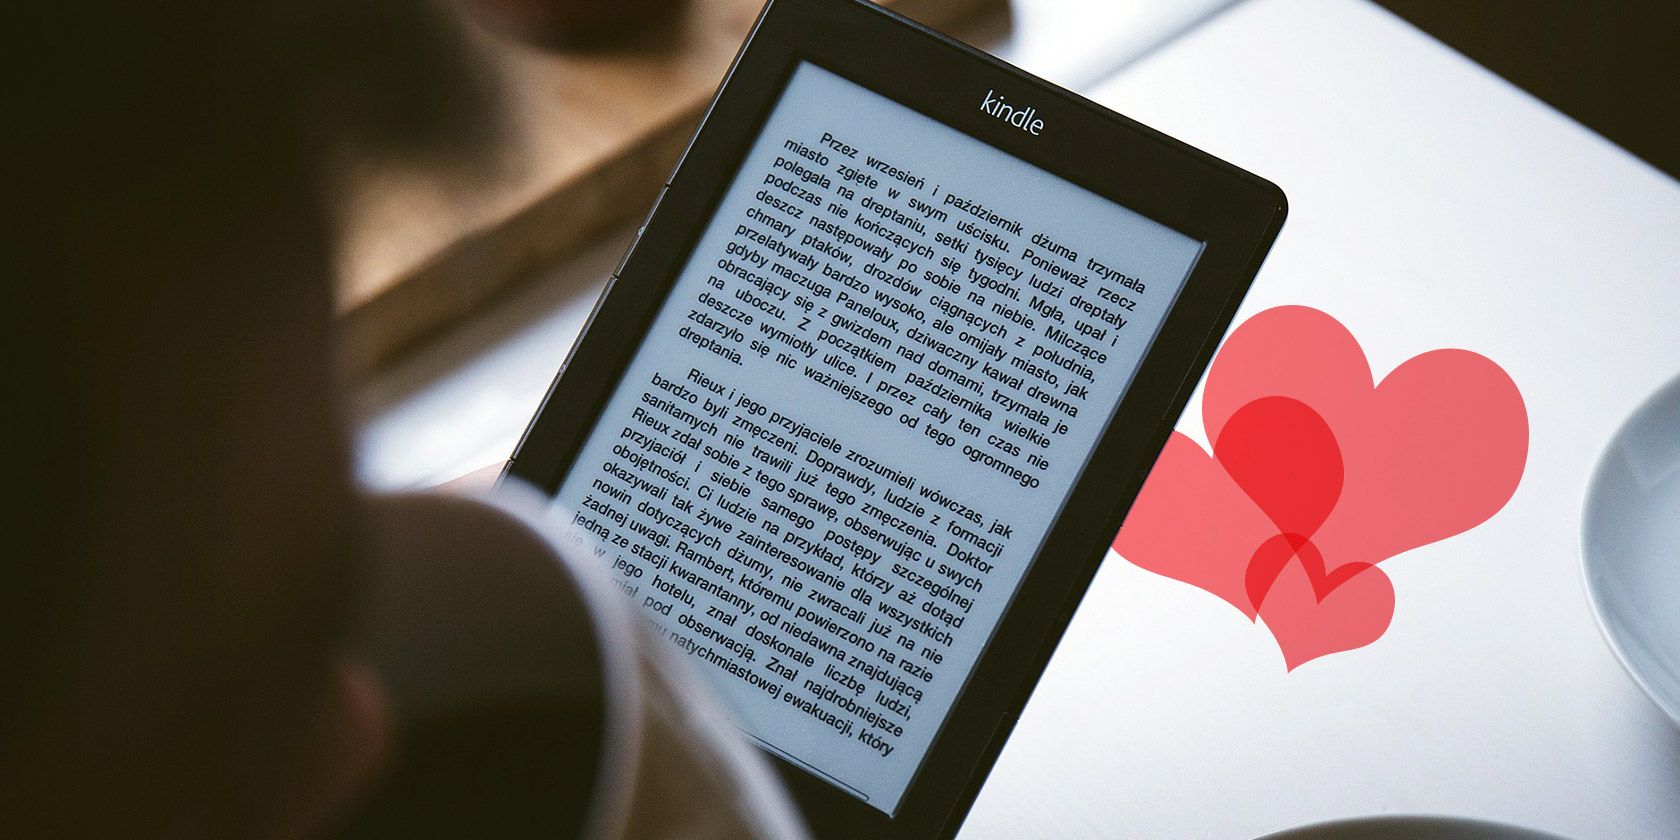 Why You Should Buy a Kindle (Even If You Love Real Books)